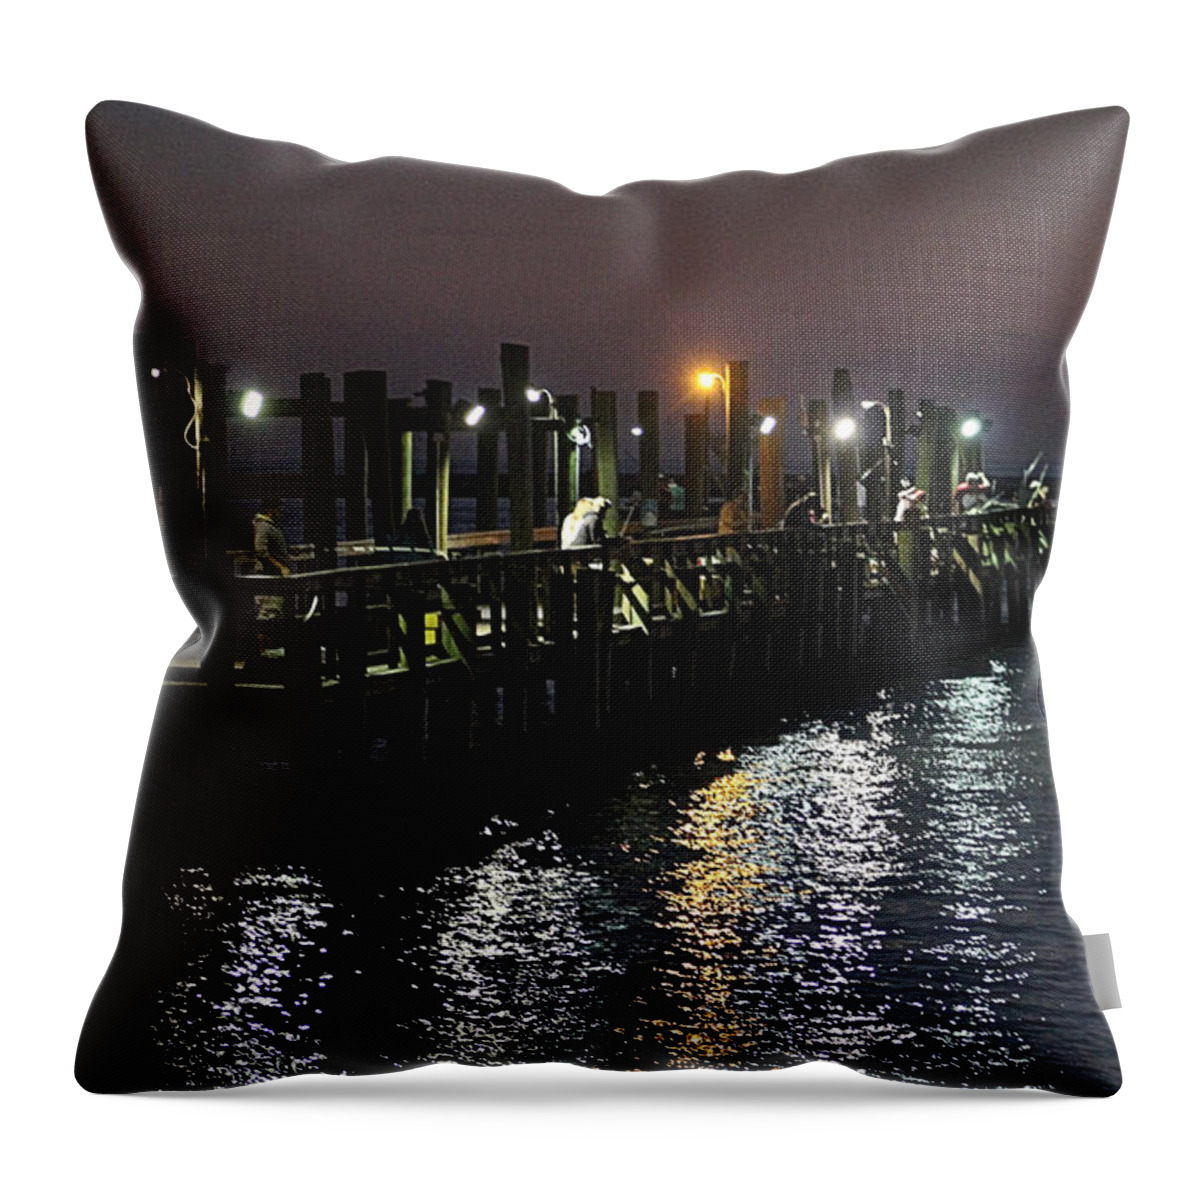 Oceanic Throw Pillow featuring the photograph Fishing Off The Oceanic Fishing Pier by Robert Banach